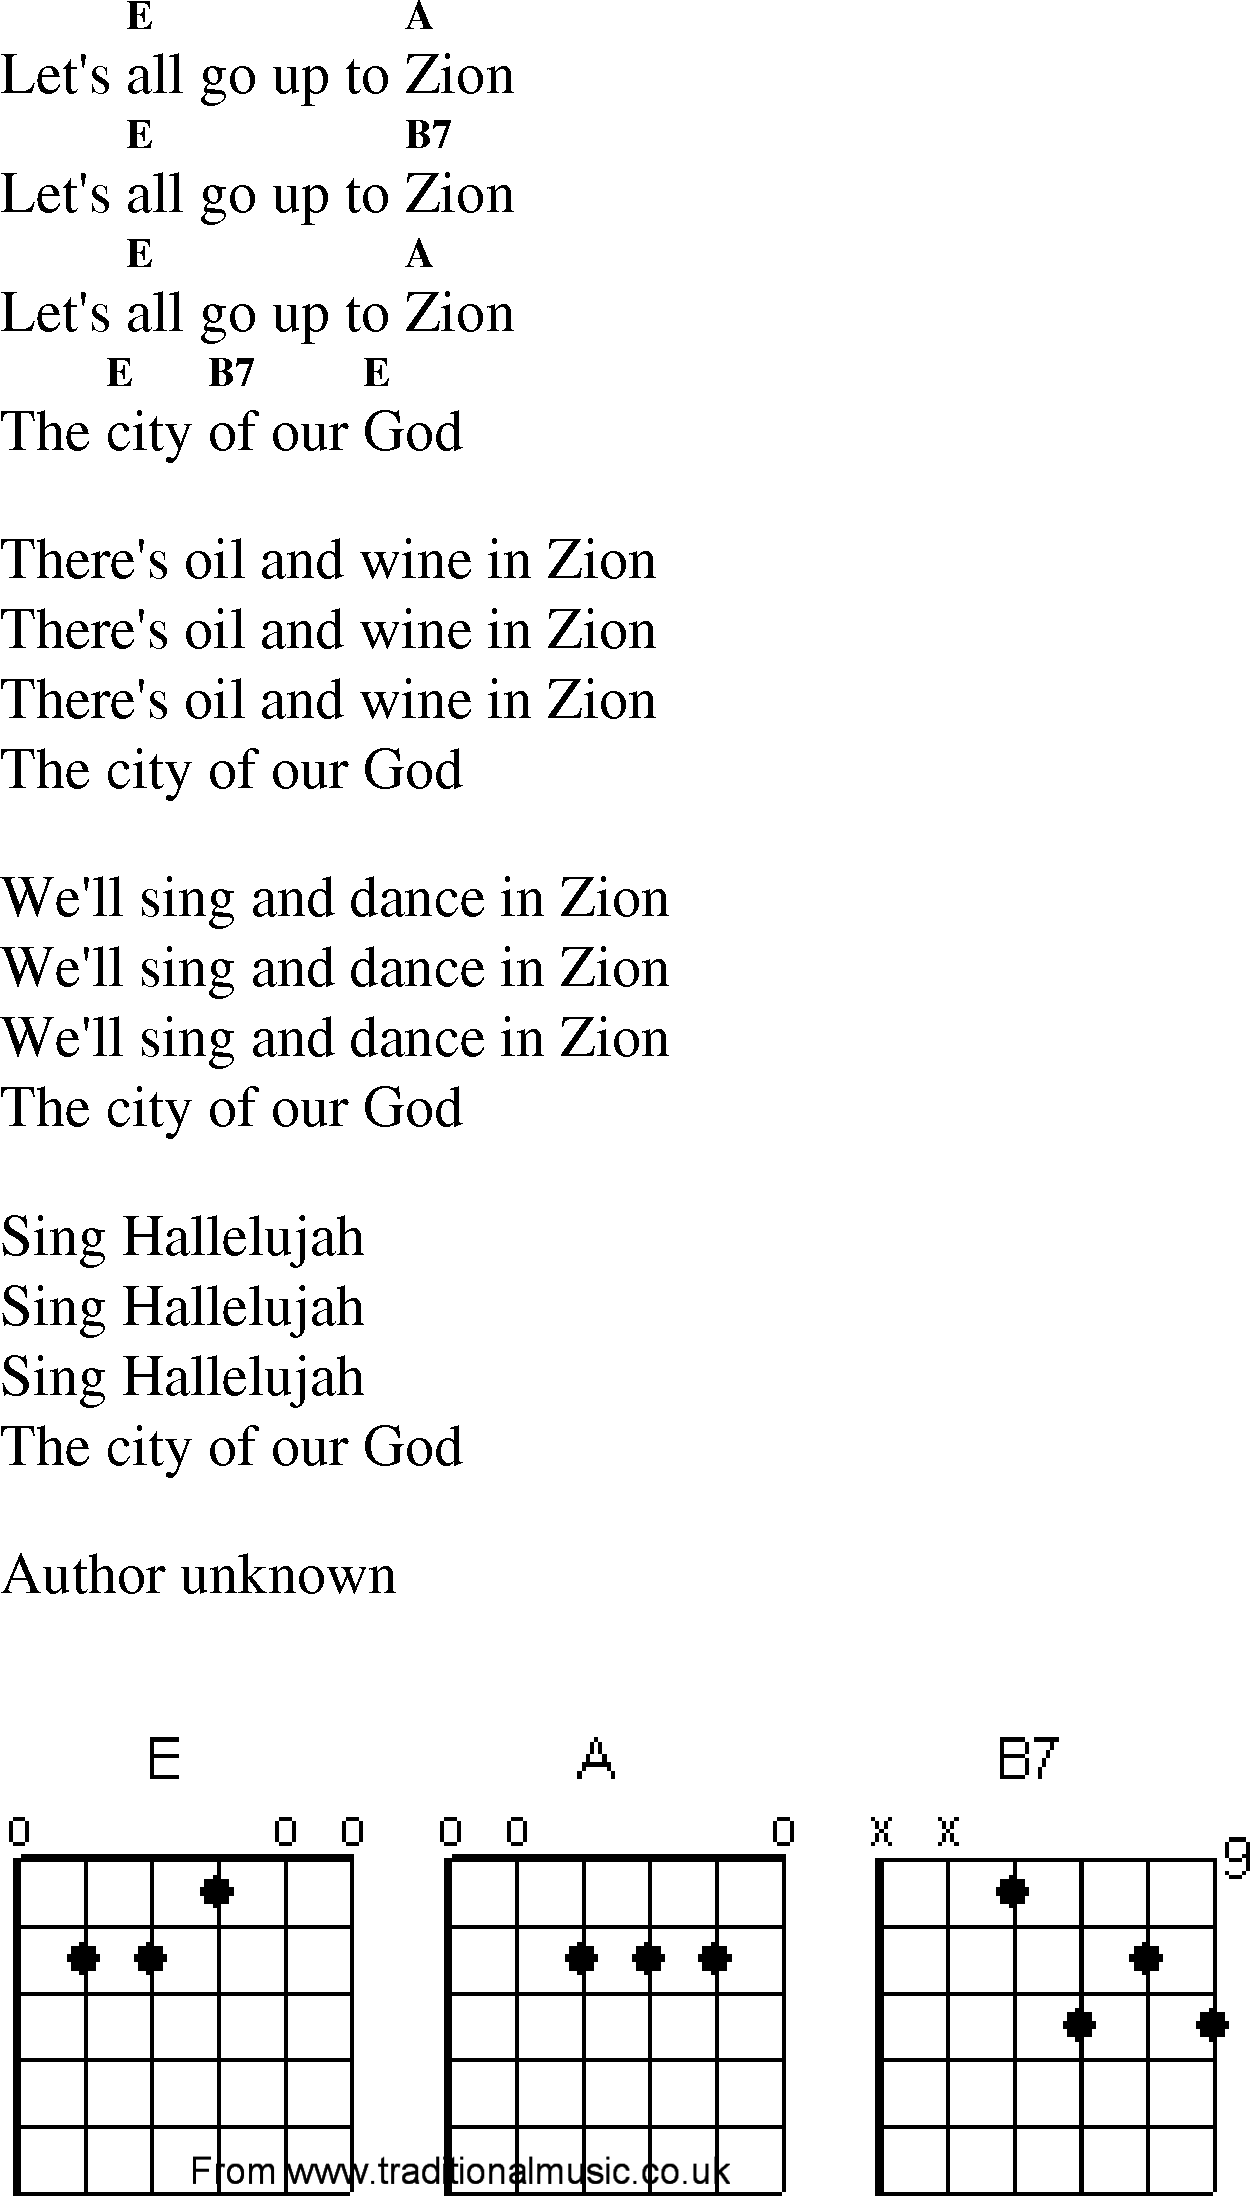 Gospel Song: lets_all_go_up_to_zion, lyrics and chords.